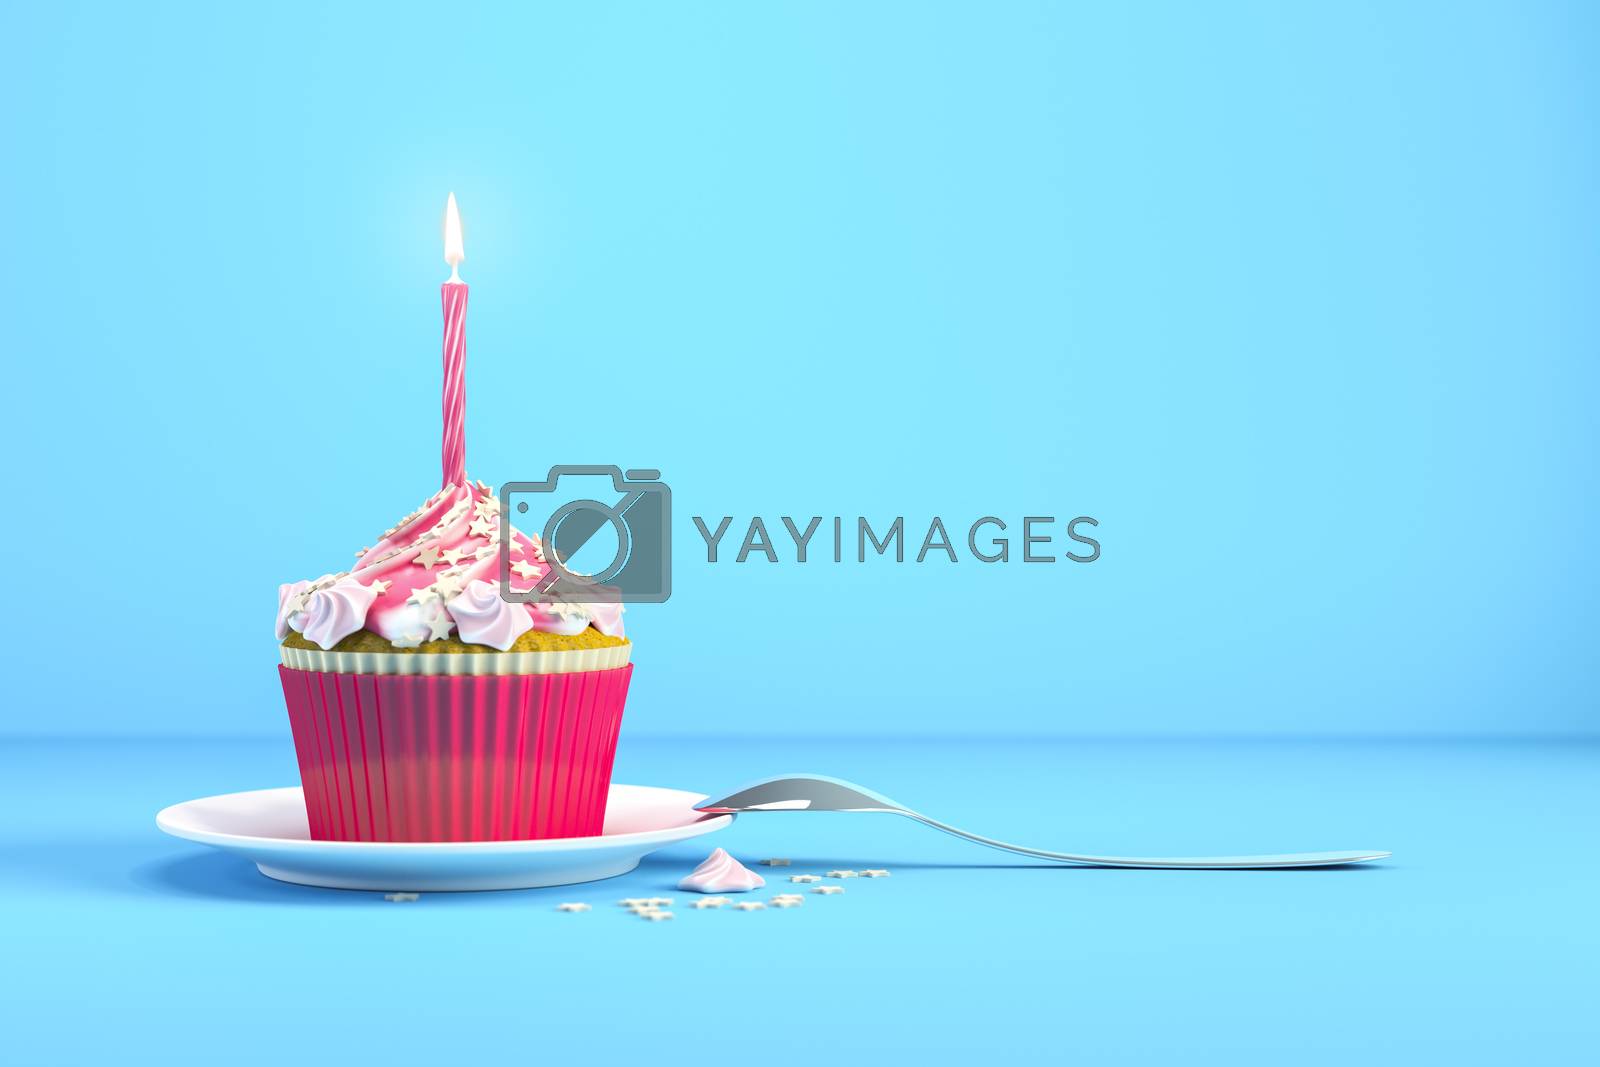 Royalty free image of delicious cupcake with a burning candle by magann